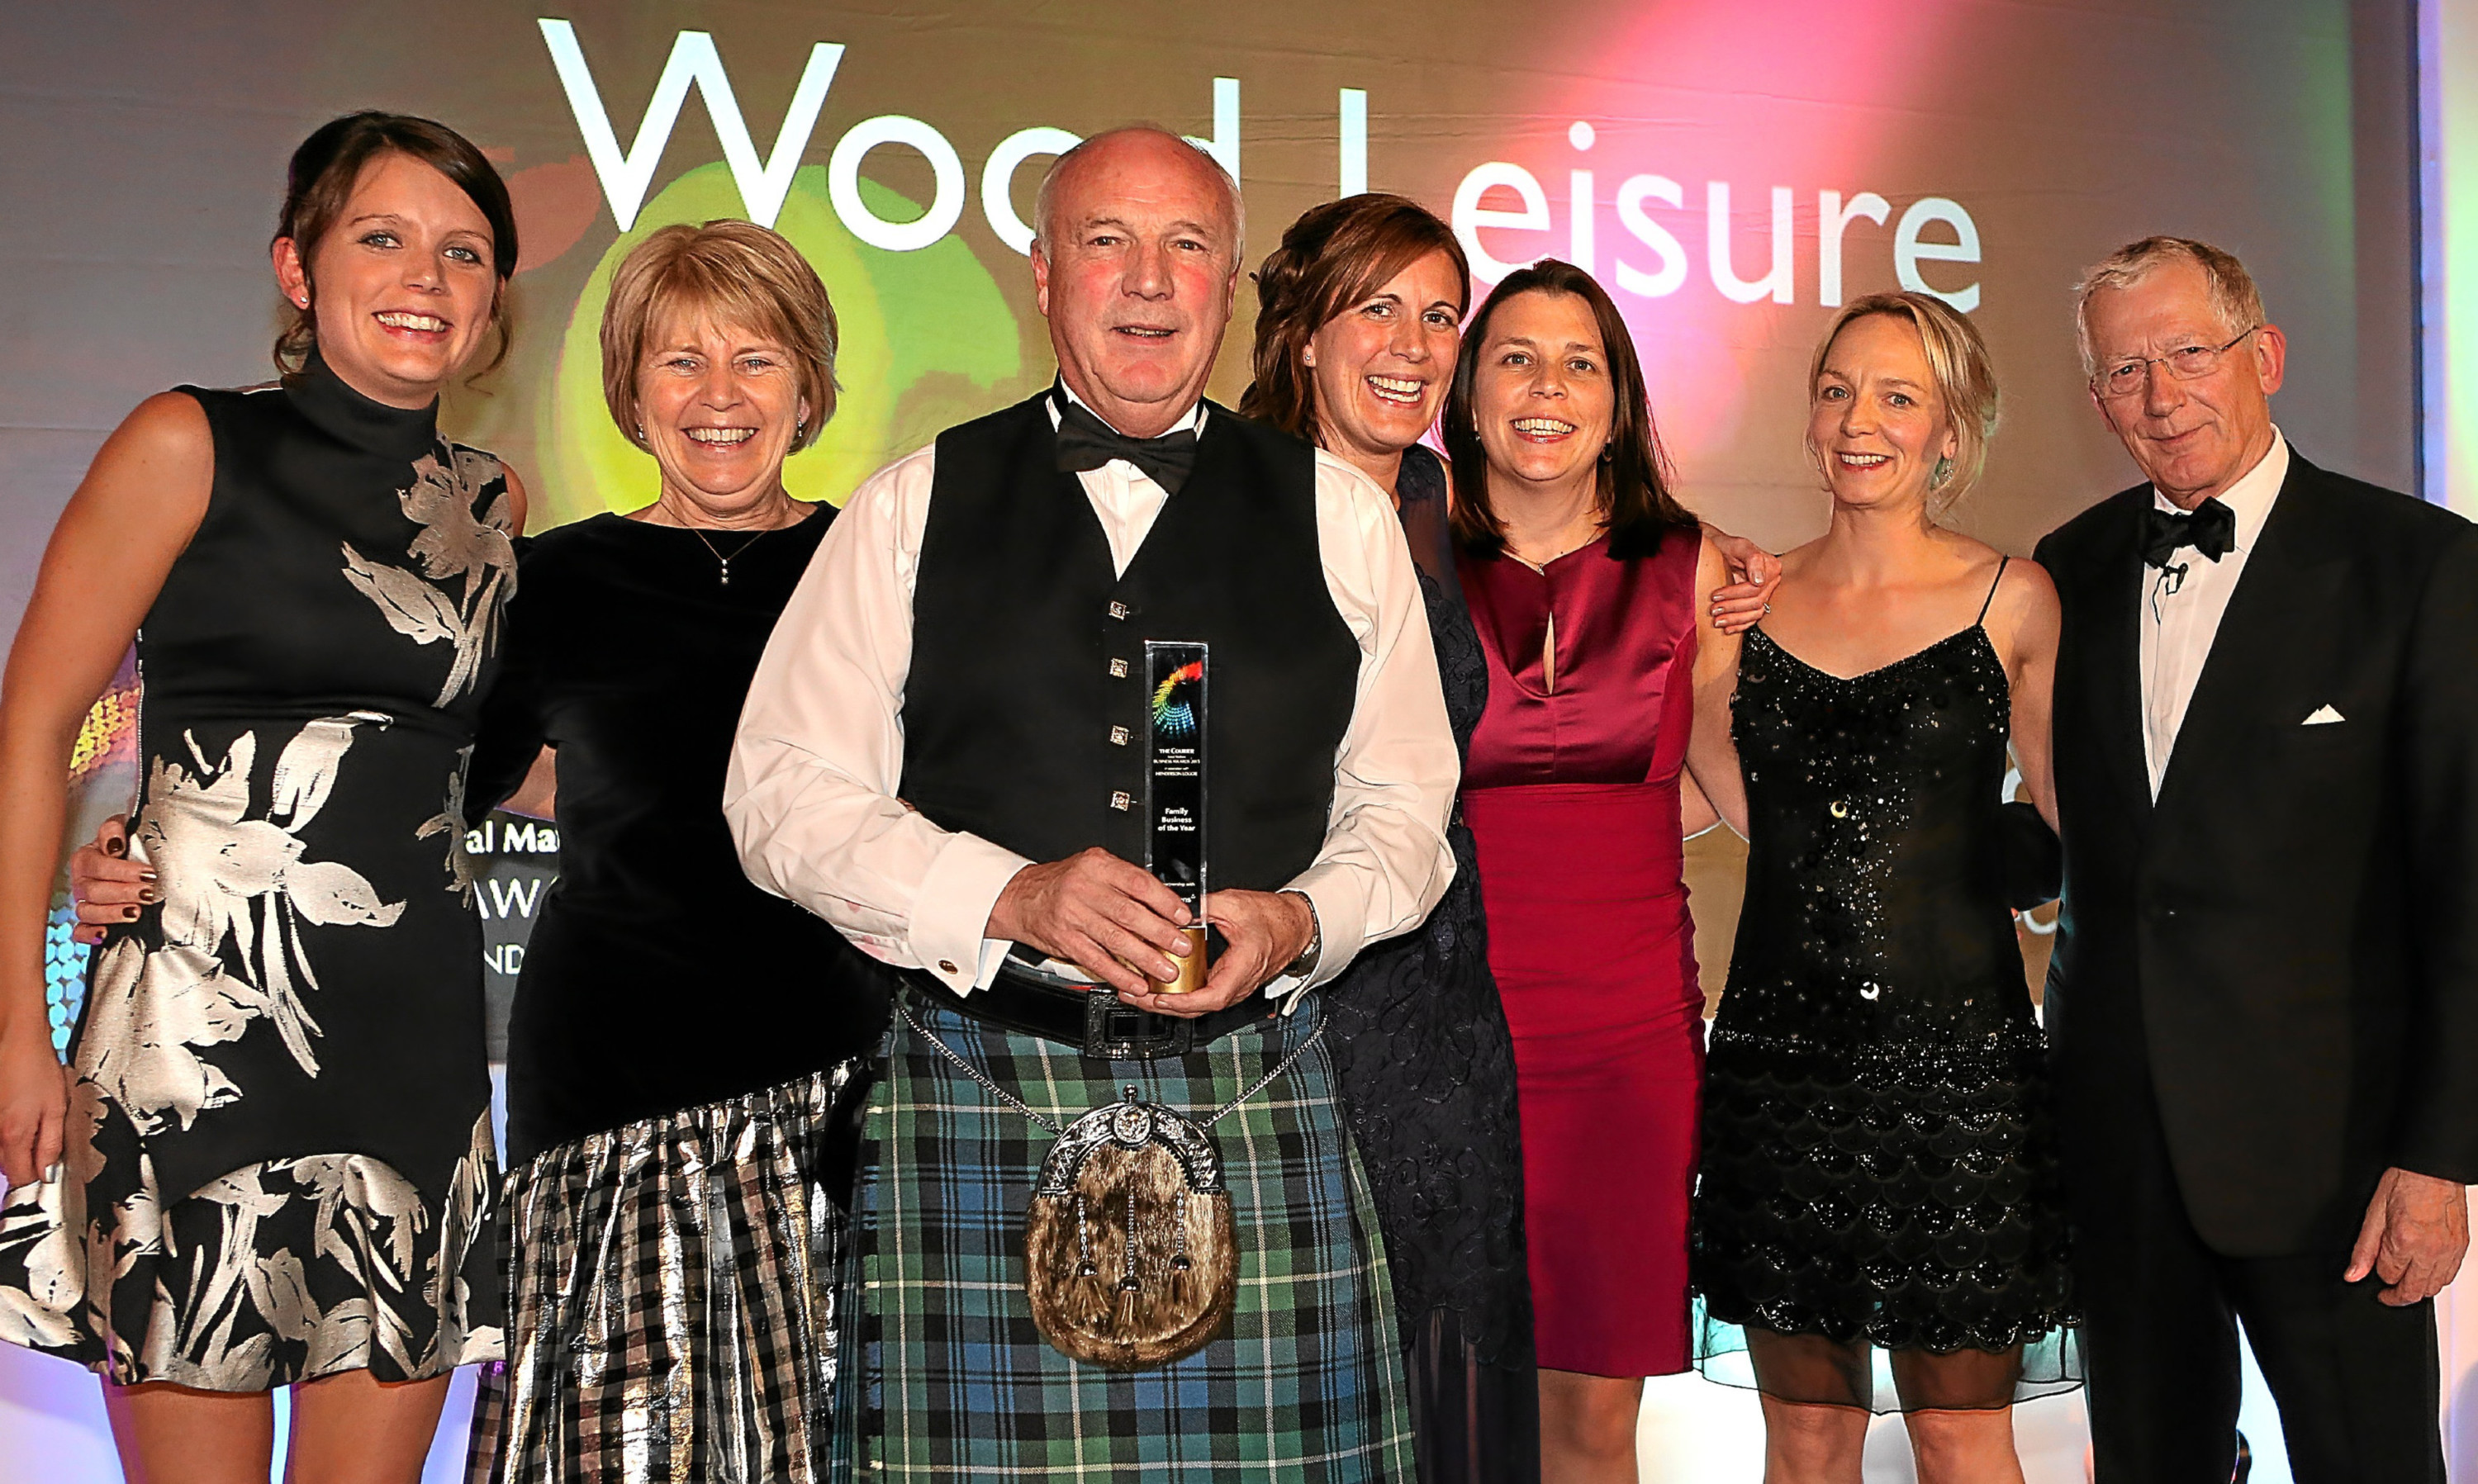 The Wood family celebrate their awards success with Lesley Larg of Thorntons and 2015 host Nick Hewer.